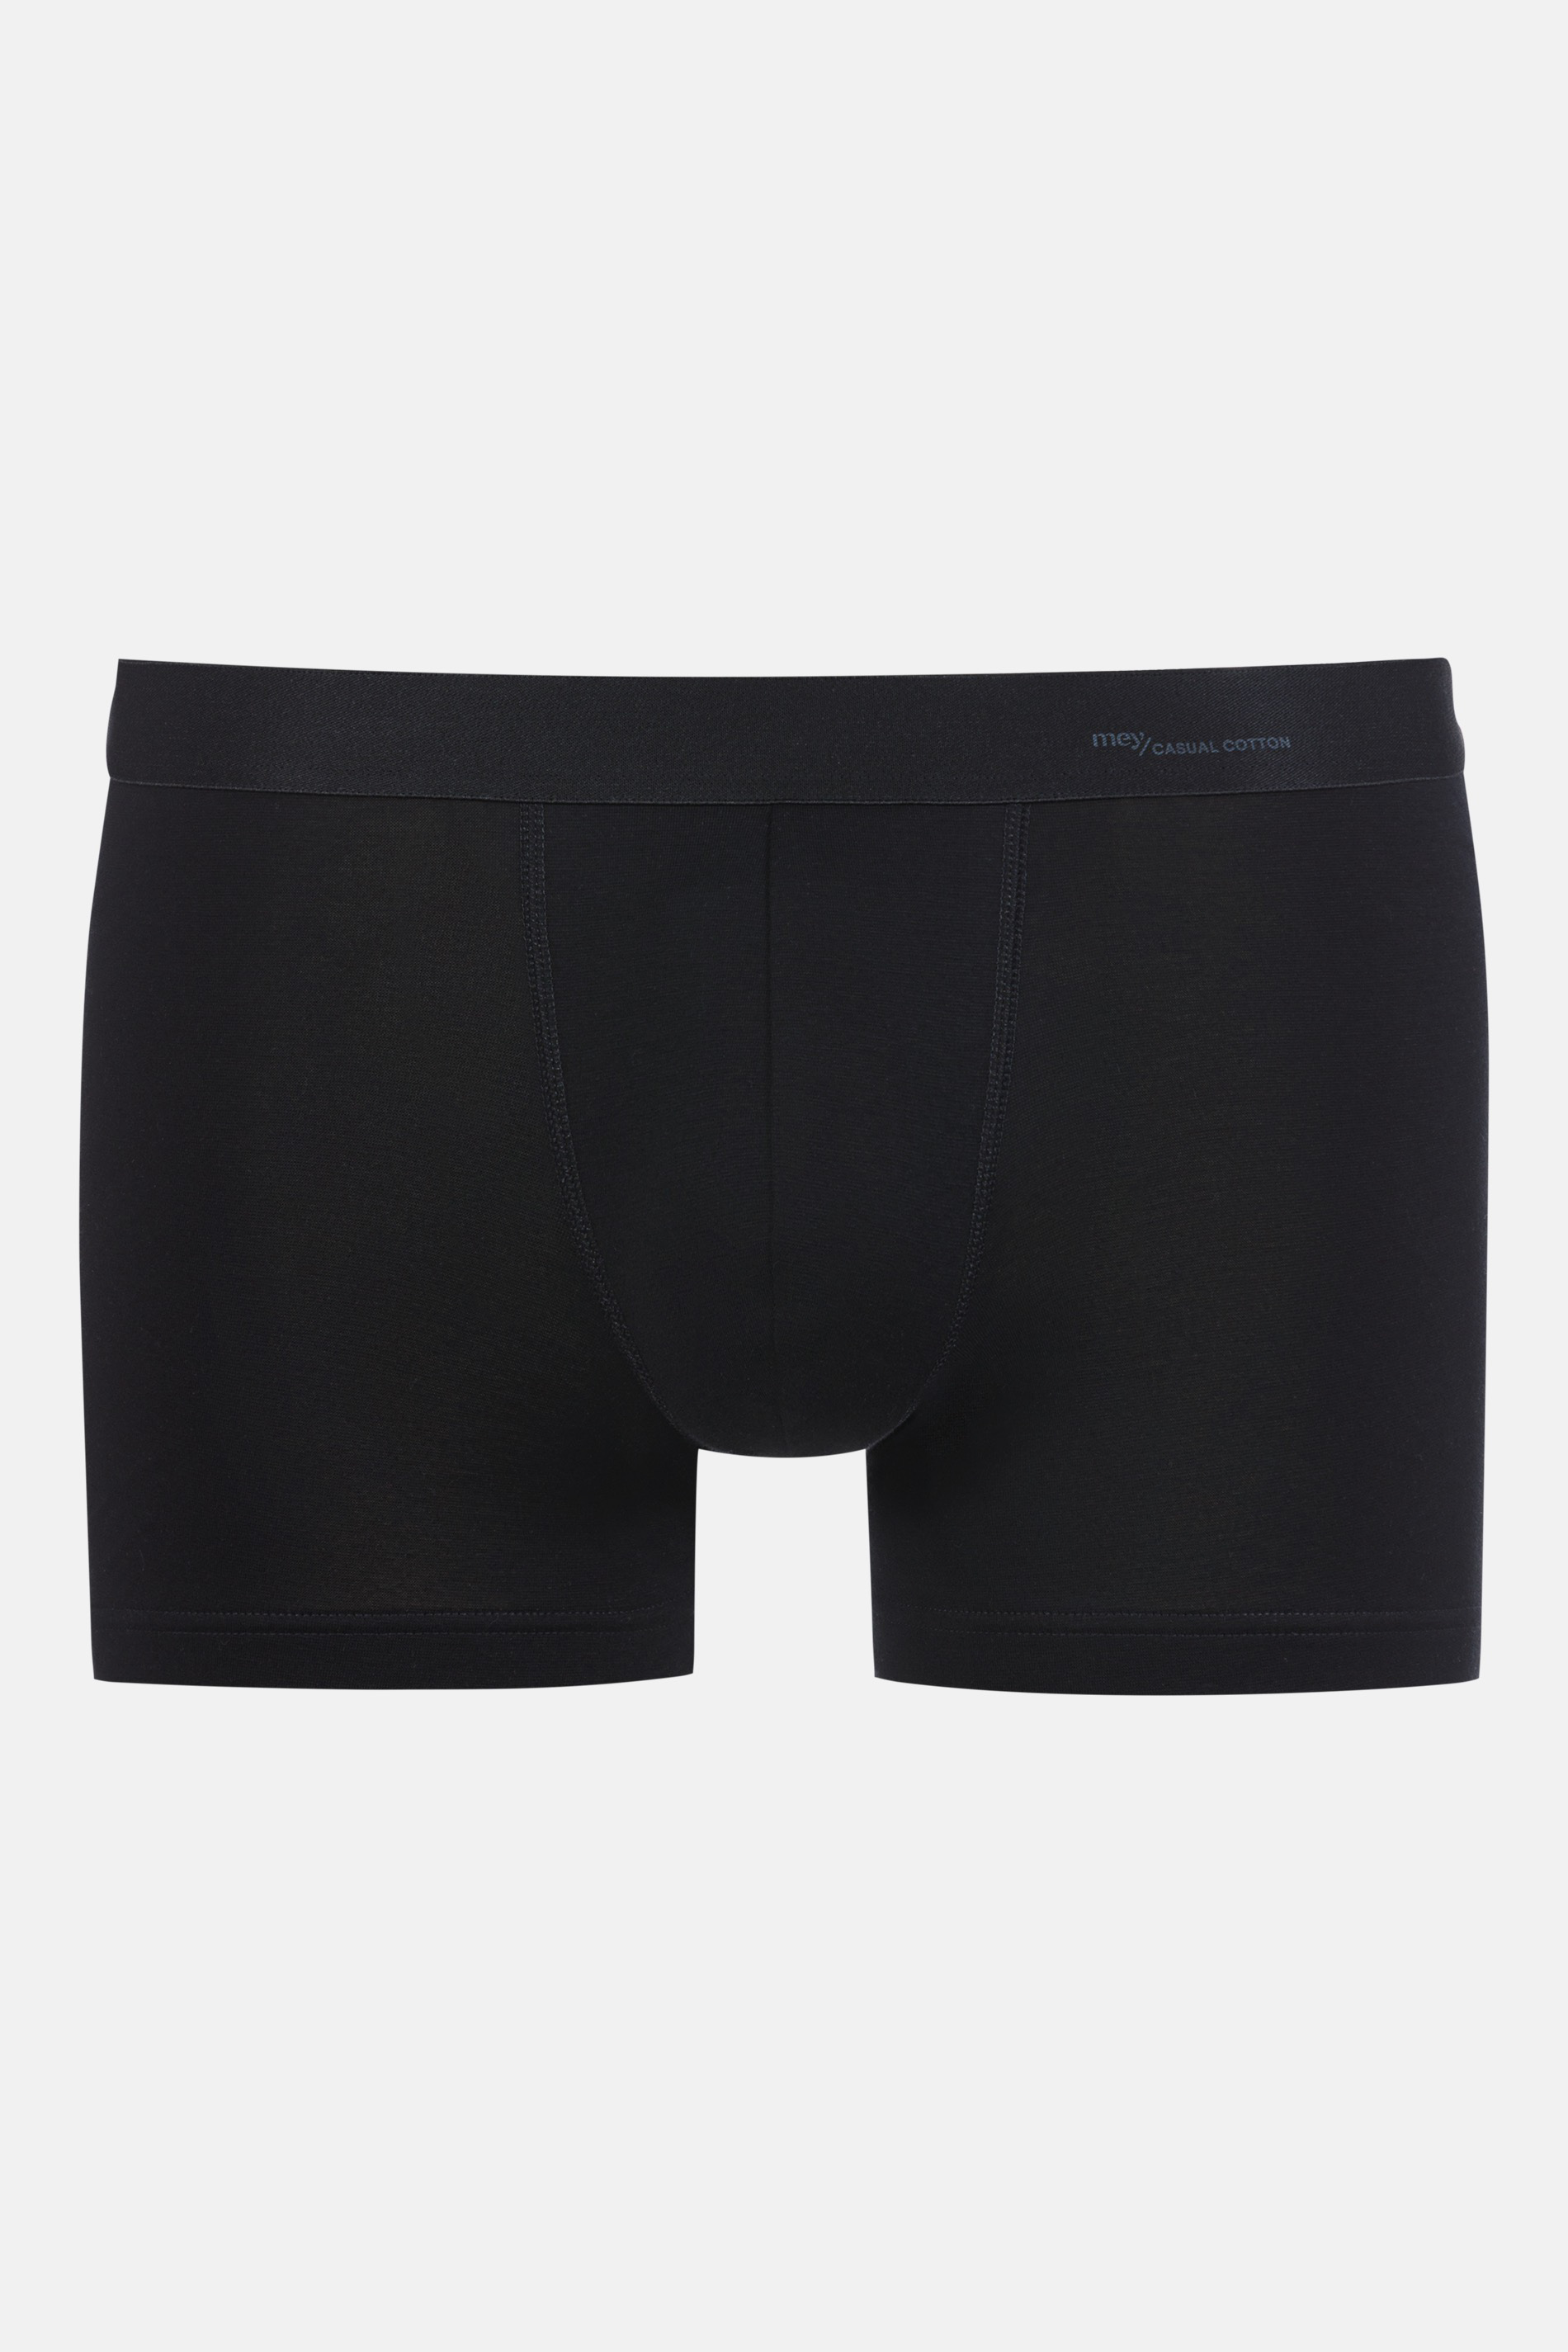 Shorty Serie Casual Cotton Uitknippen | mey®